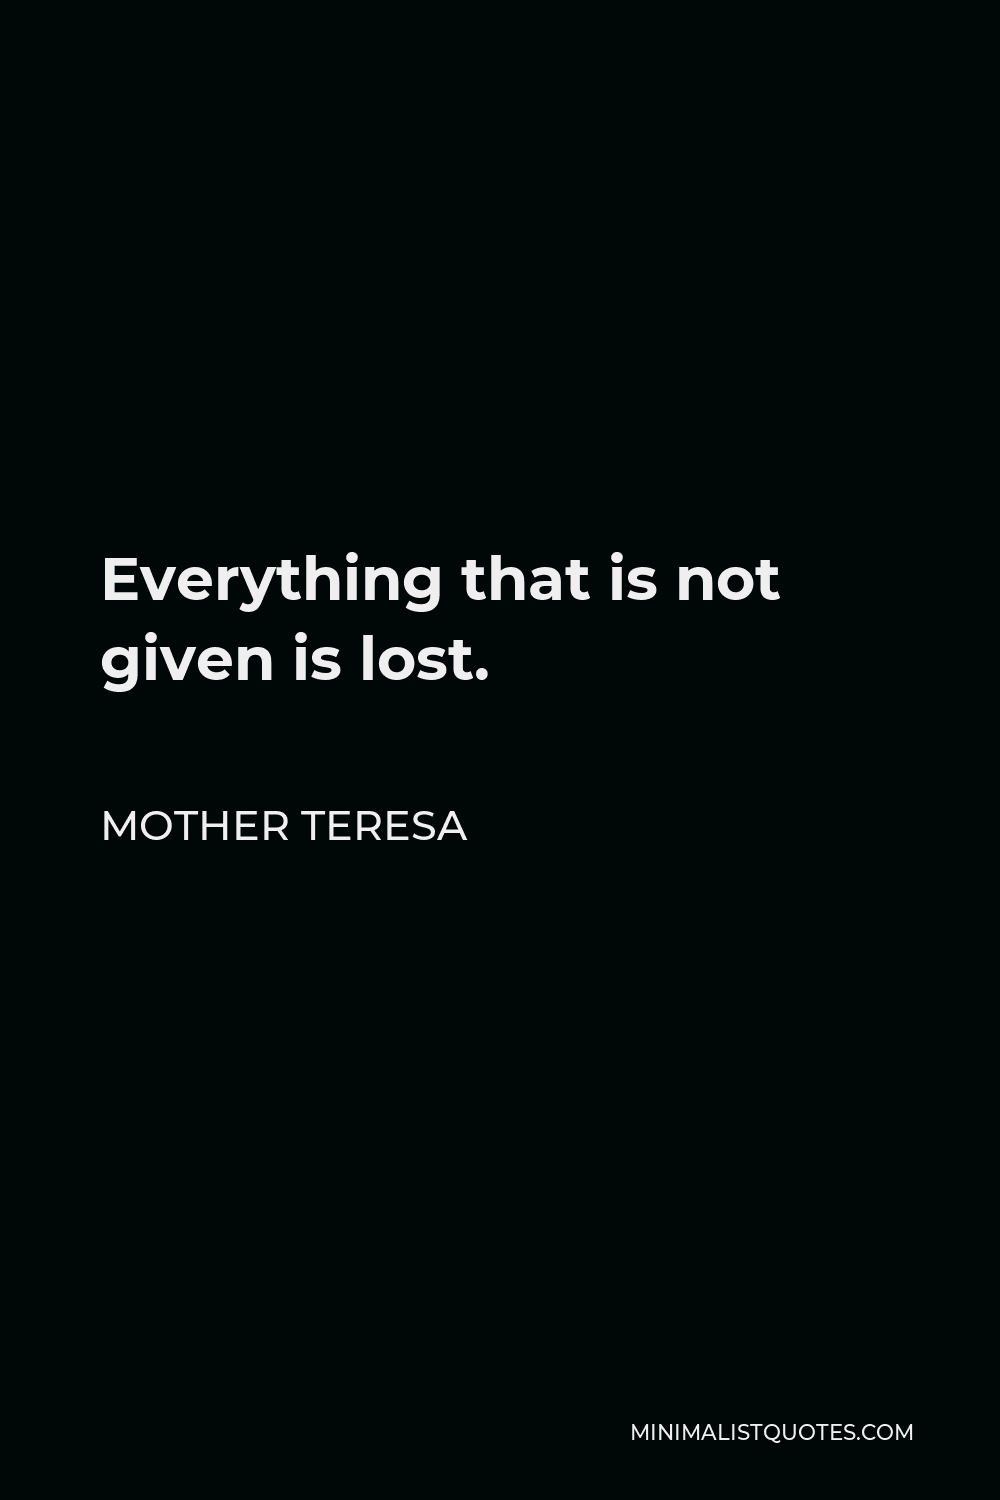 Mother Teresa Quote - Everything that is not given is lost.